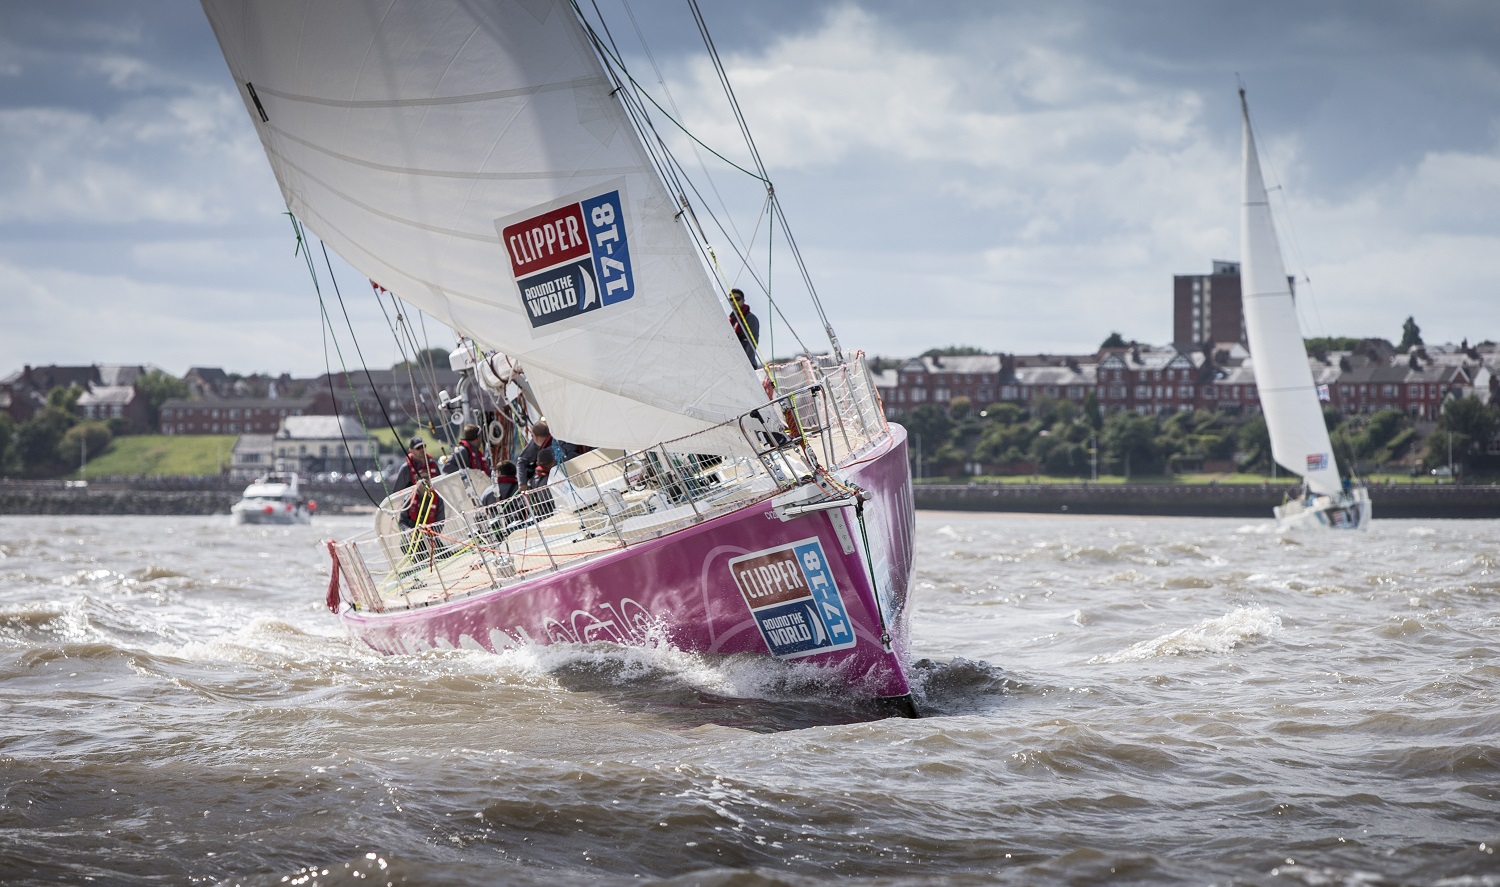 Liverpool 2018 yacht at Race Start 